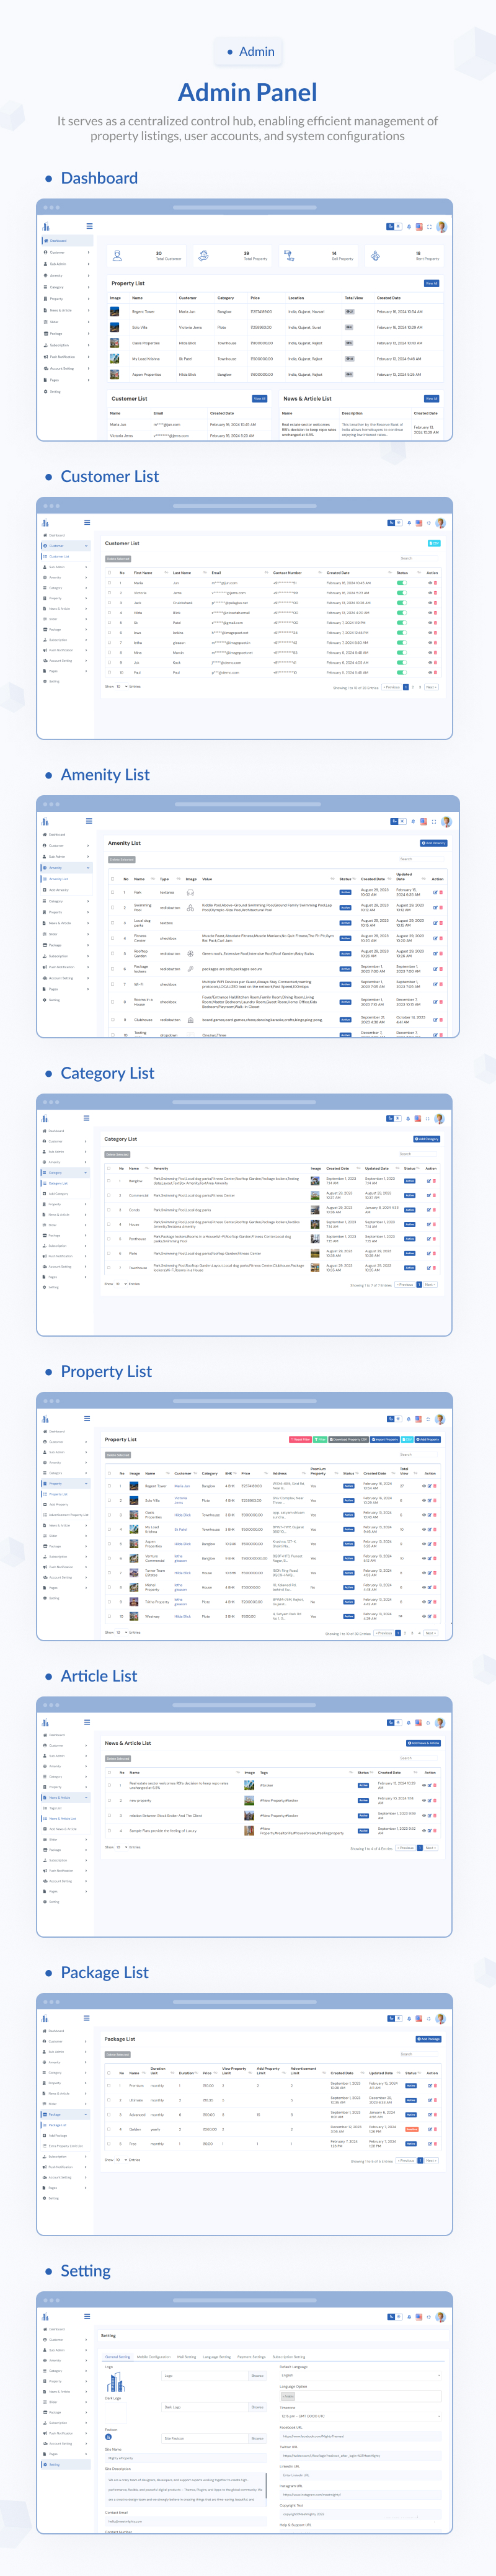 MightyProperty: Complete Real Estate Solution Flutter App With Laravel Backend + ChatGPT(AIChatbot) - 26